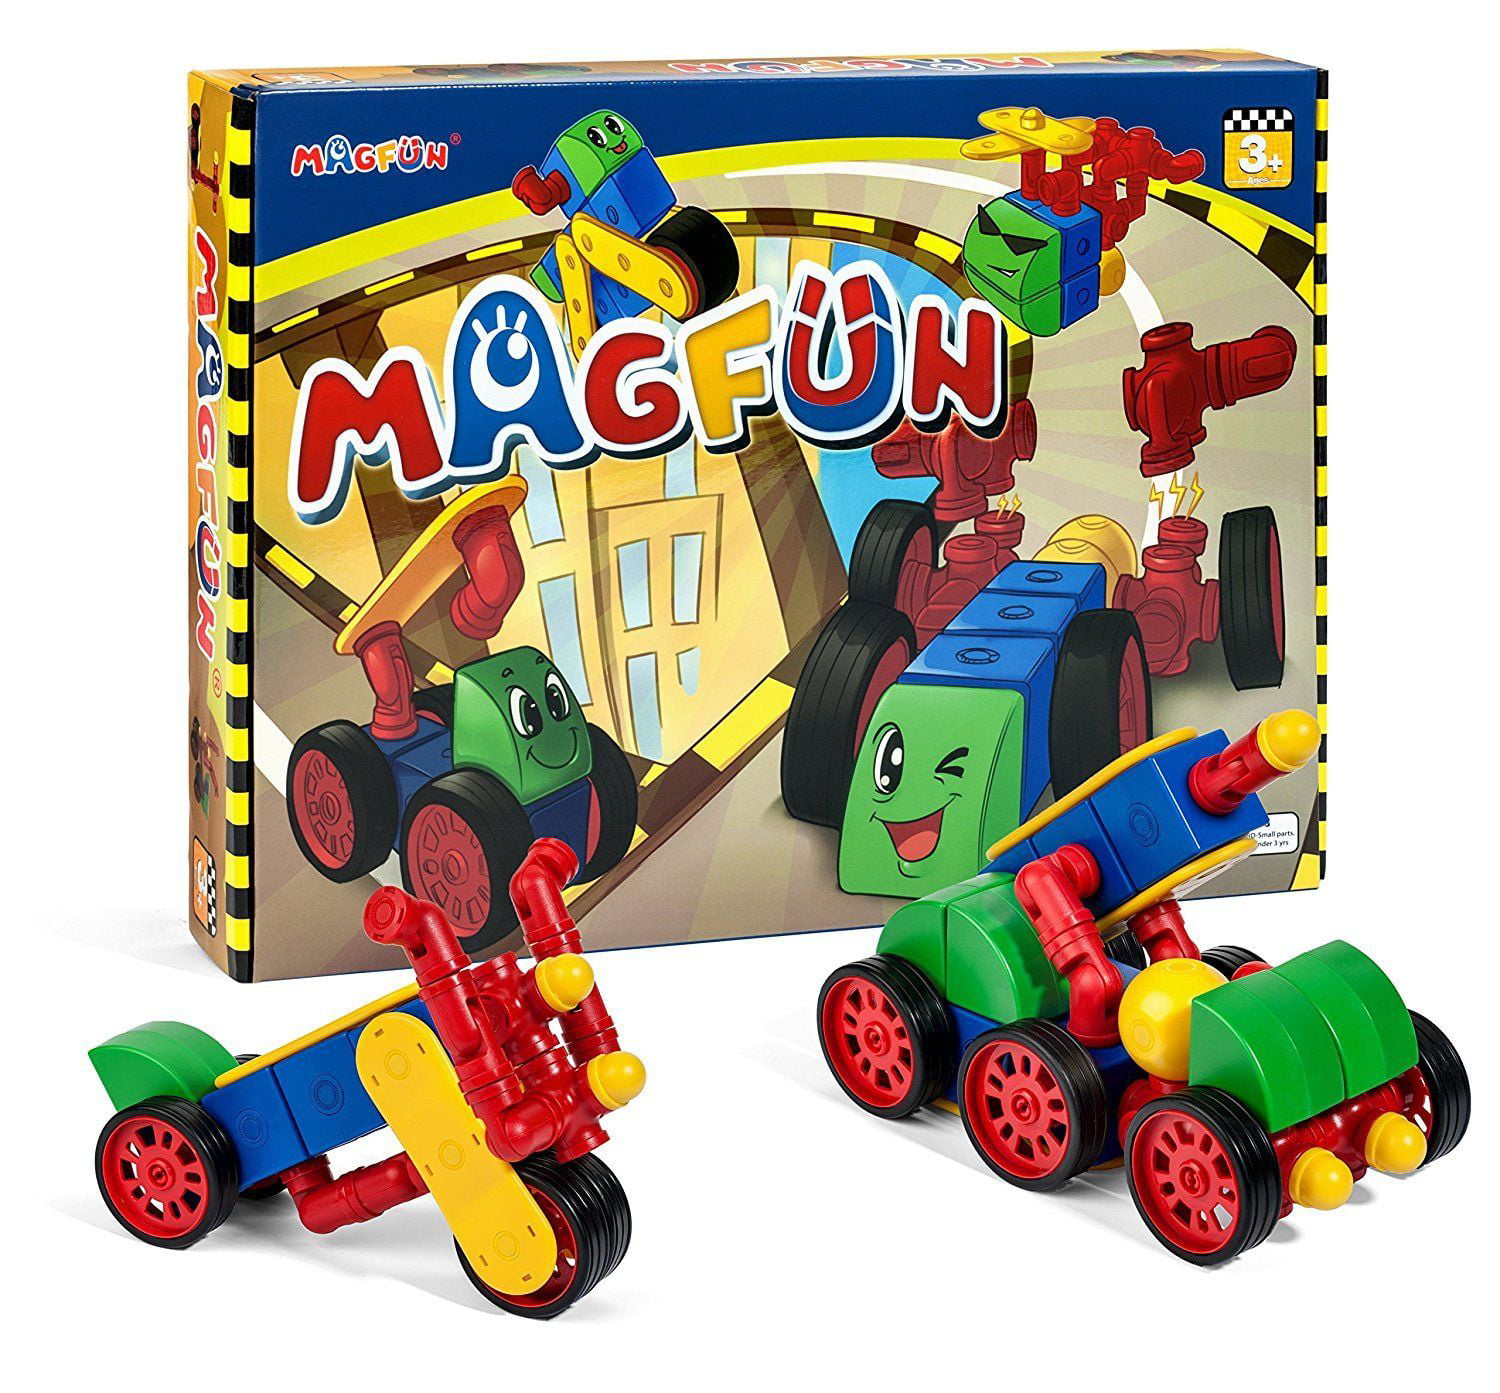 Magnetic Construction Blocks 50 Pieces Toy Magnetic Building Blocks Toy 